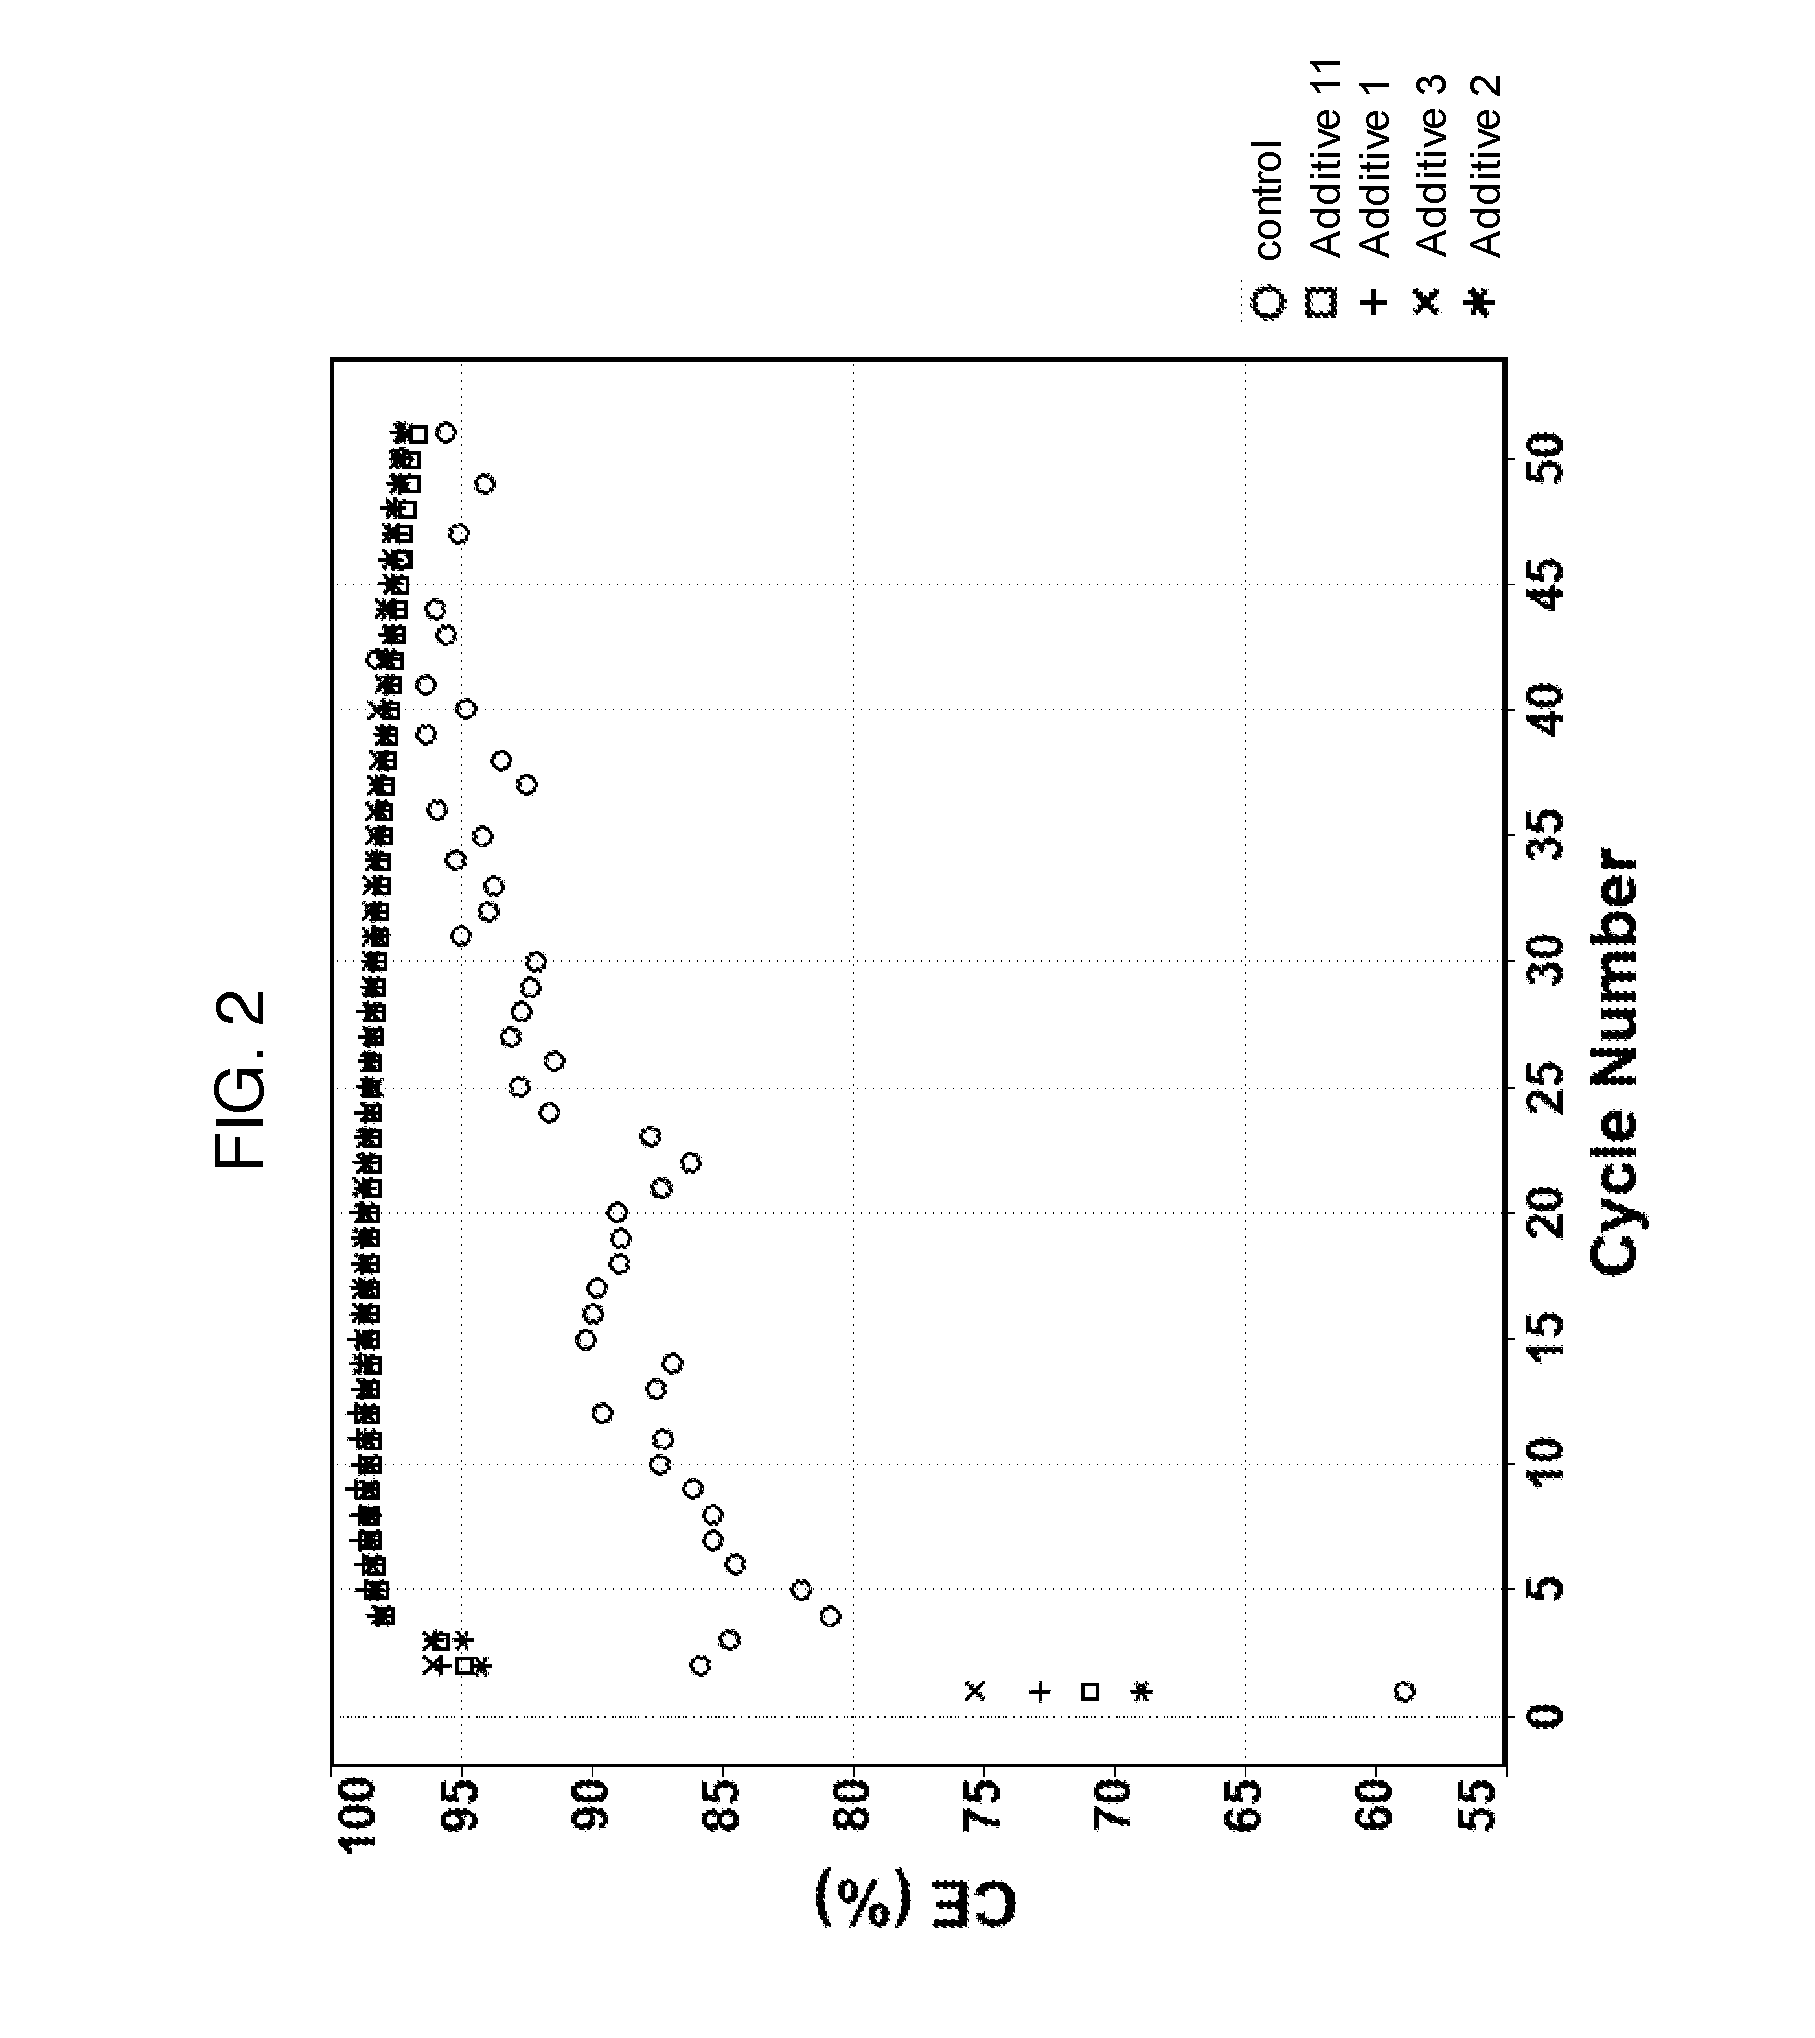 Electrolyte Formulations For Electrochemical Cells Containing A Silicon Electrode